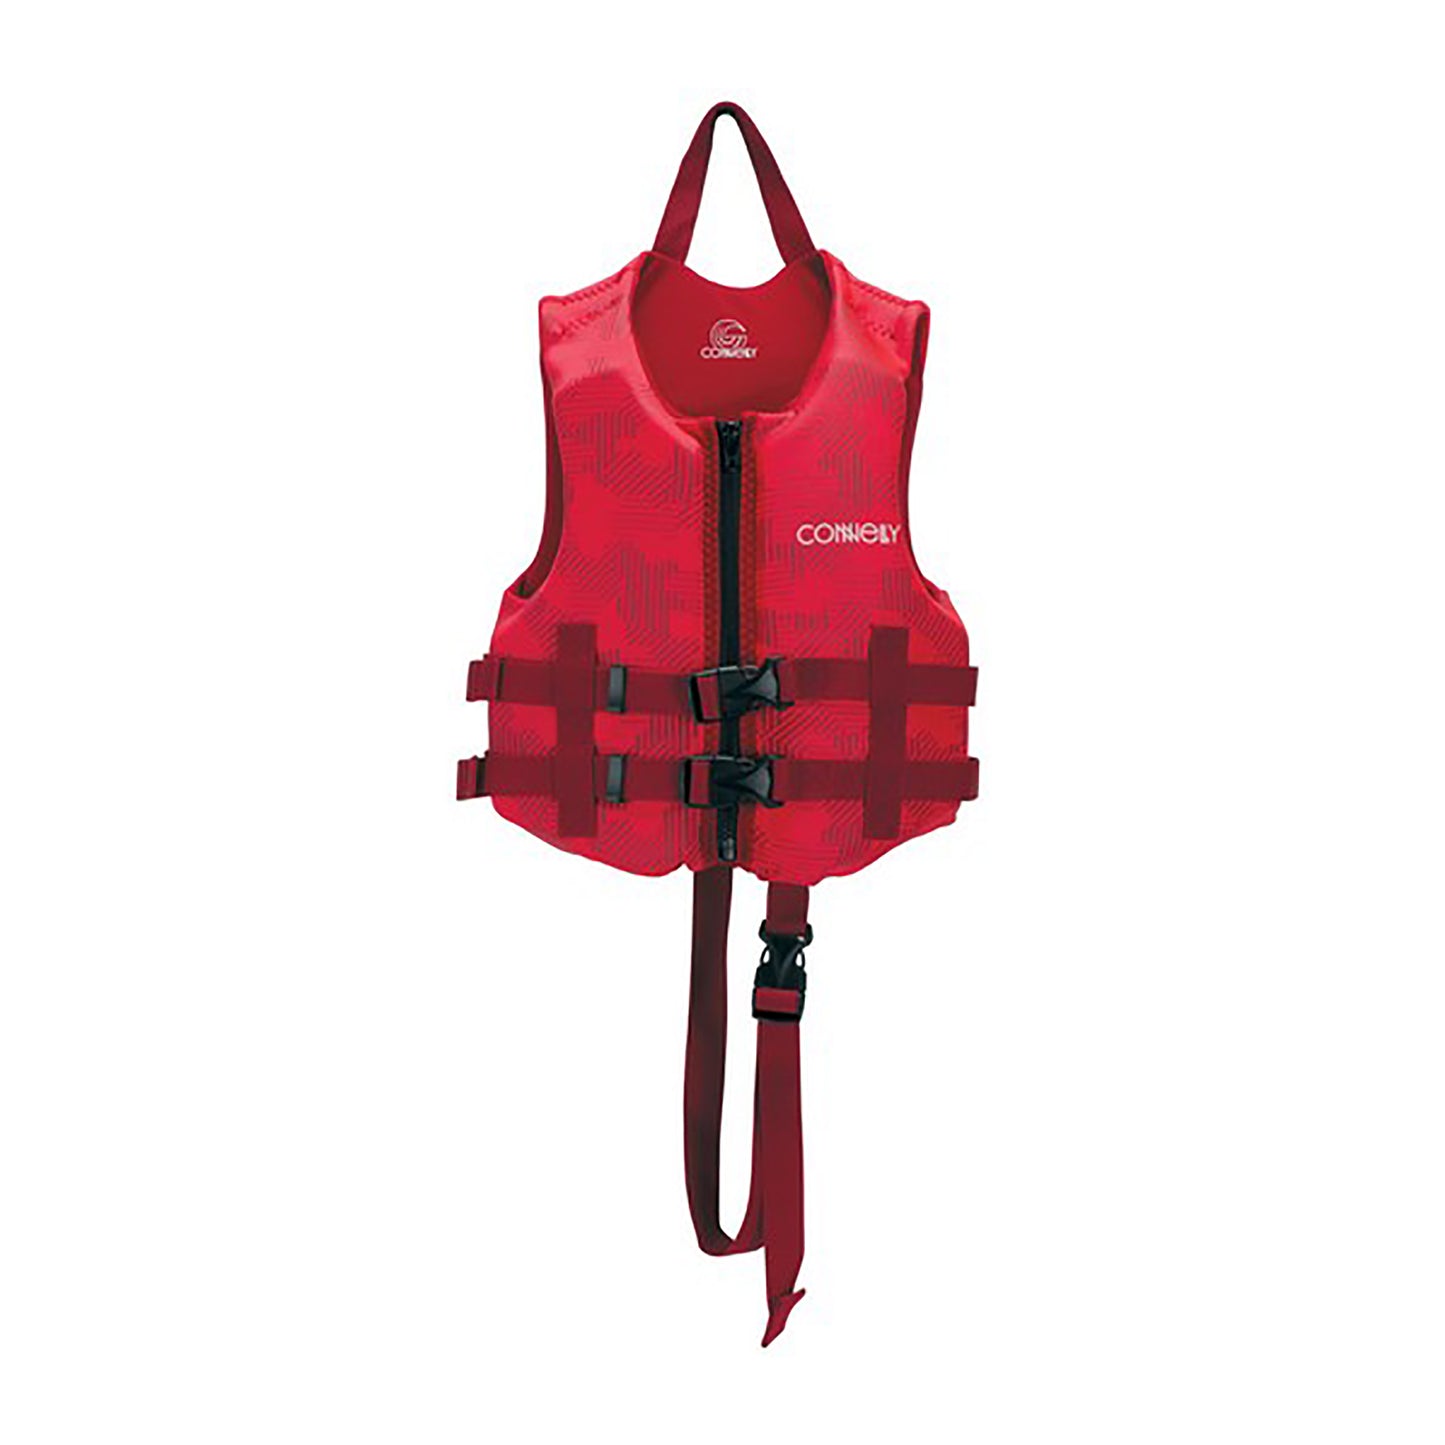 Connelly Infant, Youth, and Child Promo Neoprene Life Jacket 2020 Model